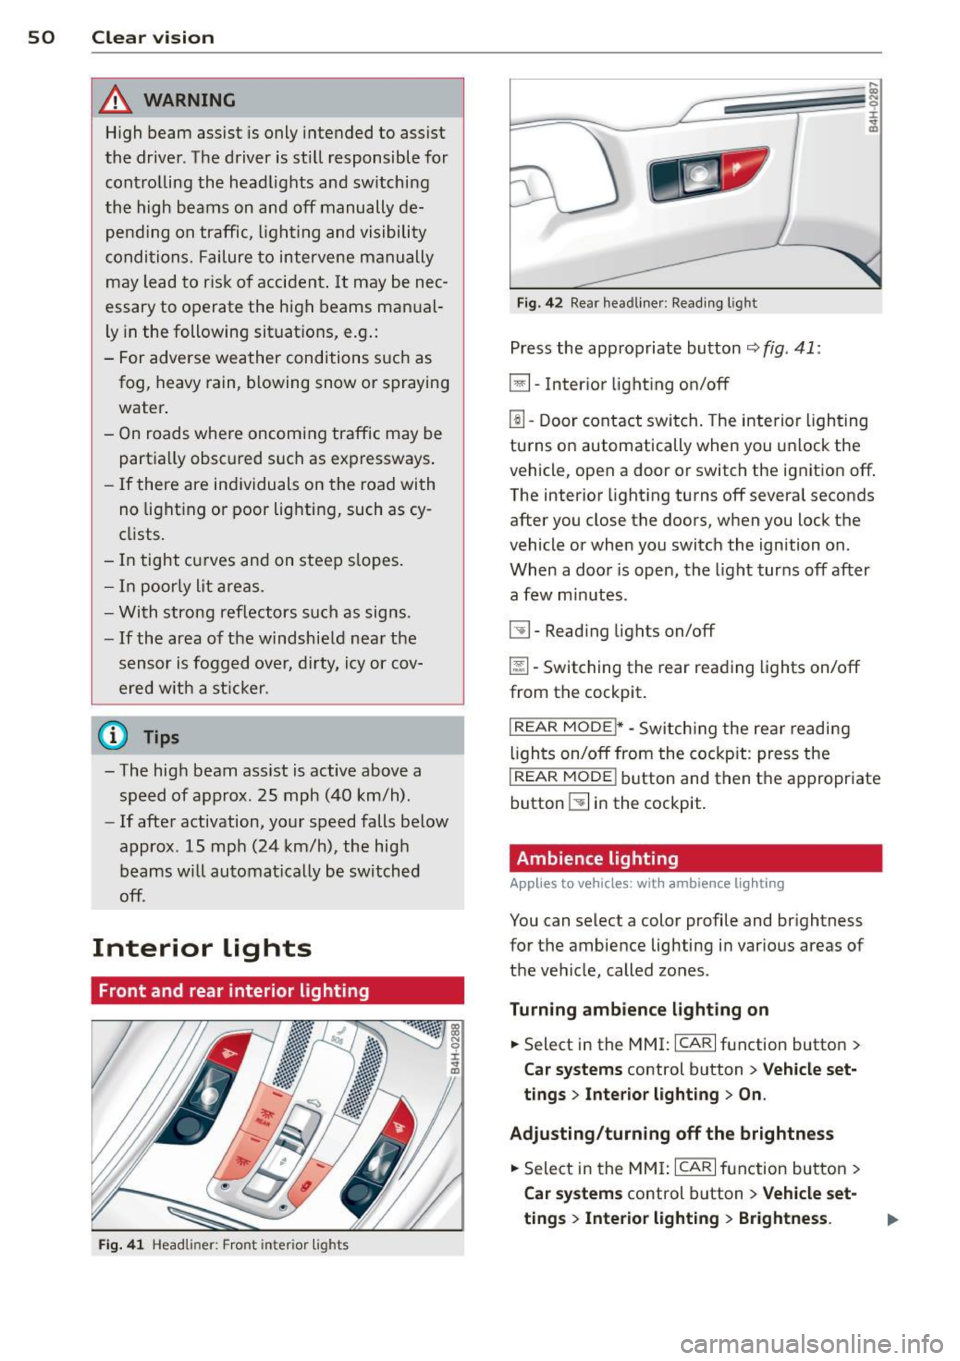 AUDI S8 2014  Owners Manual 50  Clear vis ion 
& WARNING 
H igh  beam  assist  is only  intended  to assist 
the  driver.  The  driver  is still  responsible  for  controlling  the  headlights  and  sw itching 
th e high  beams 